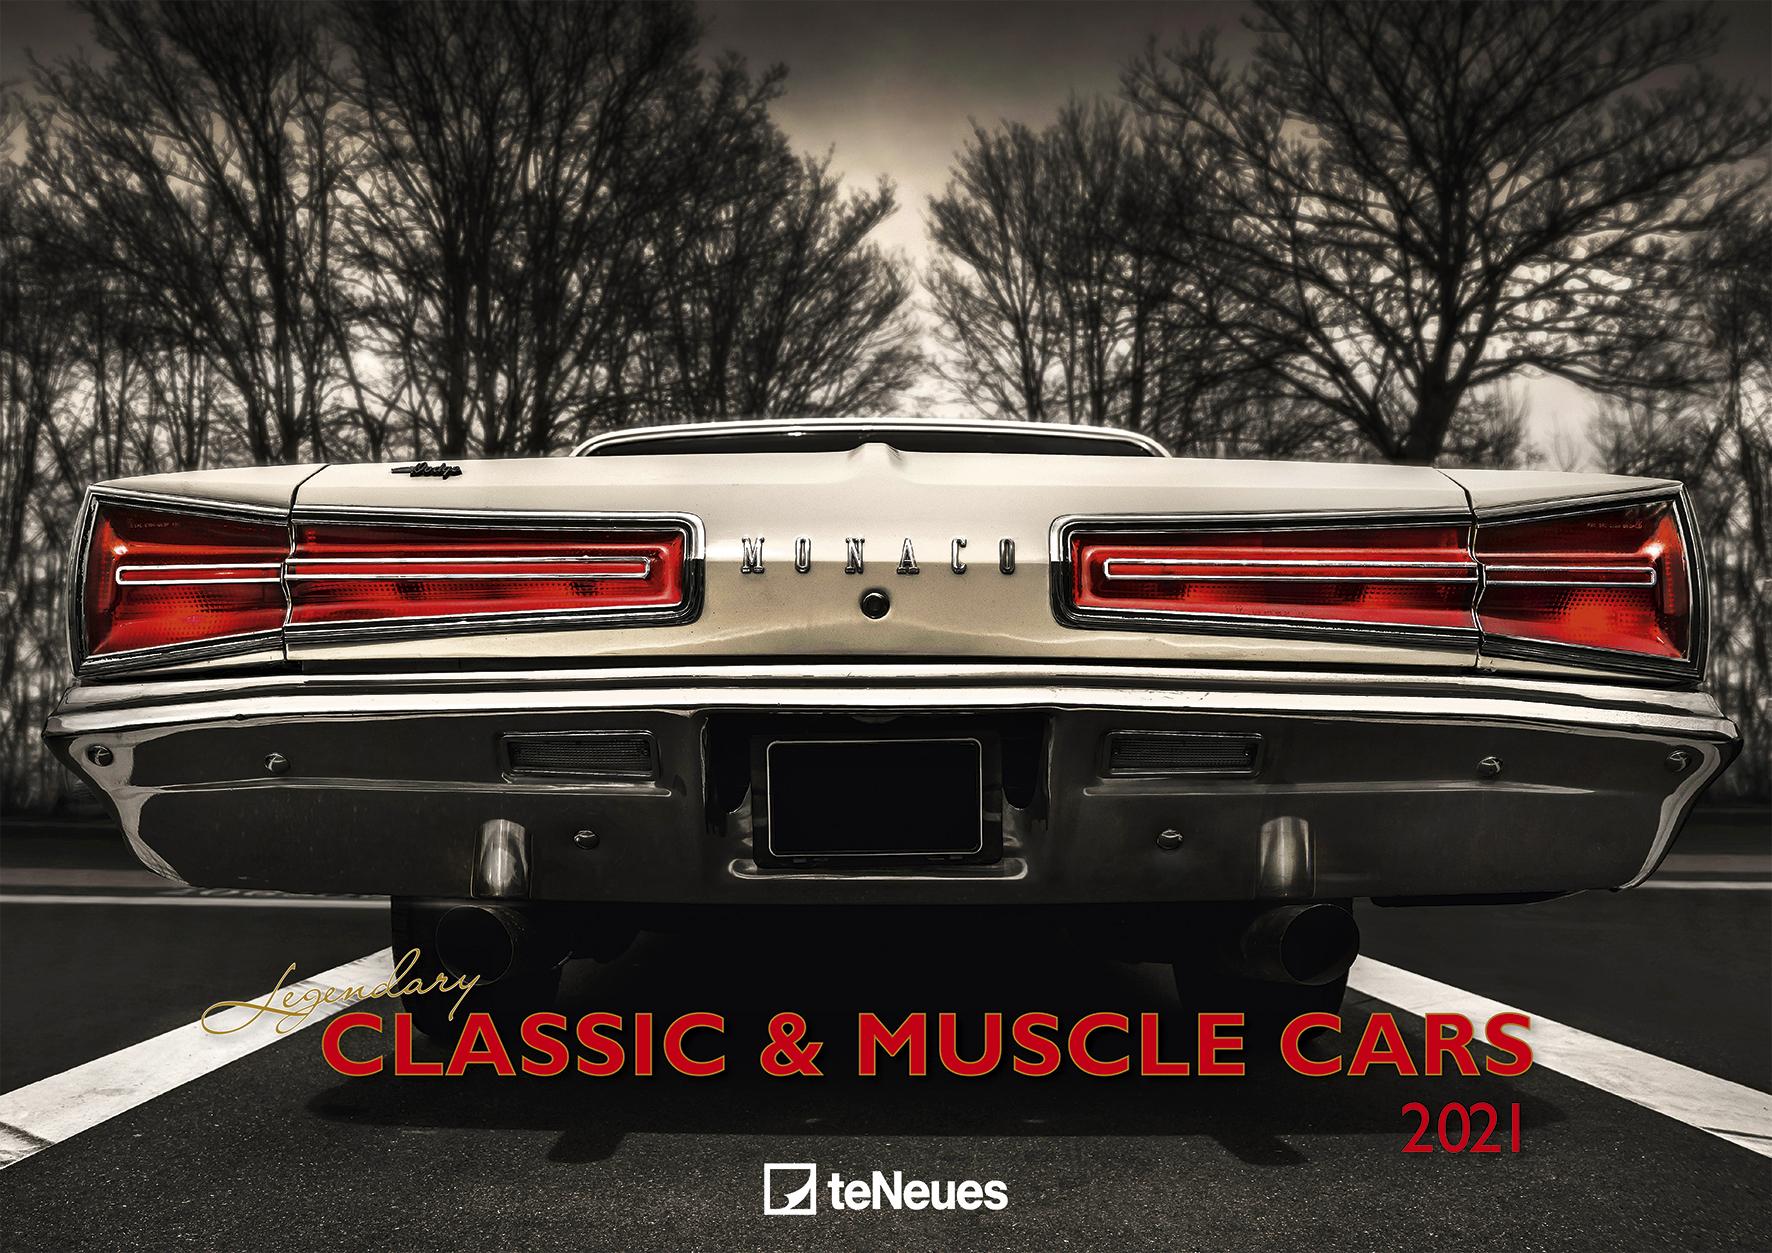 2021 Seinakalender Classic and Muscle Cars, 42X30cM